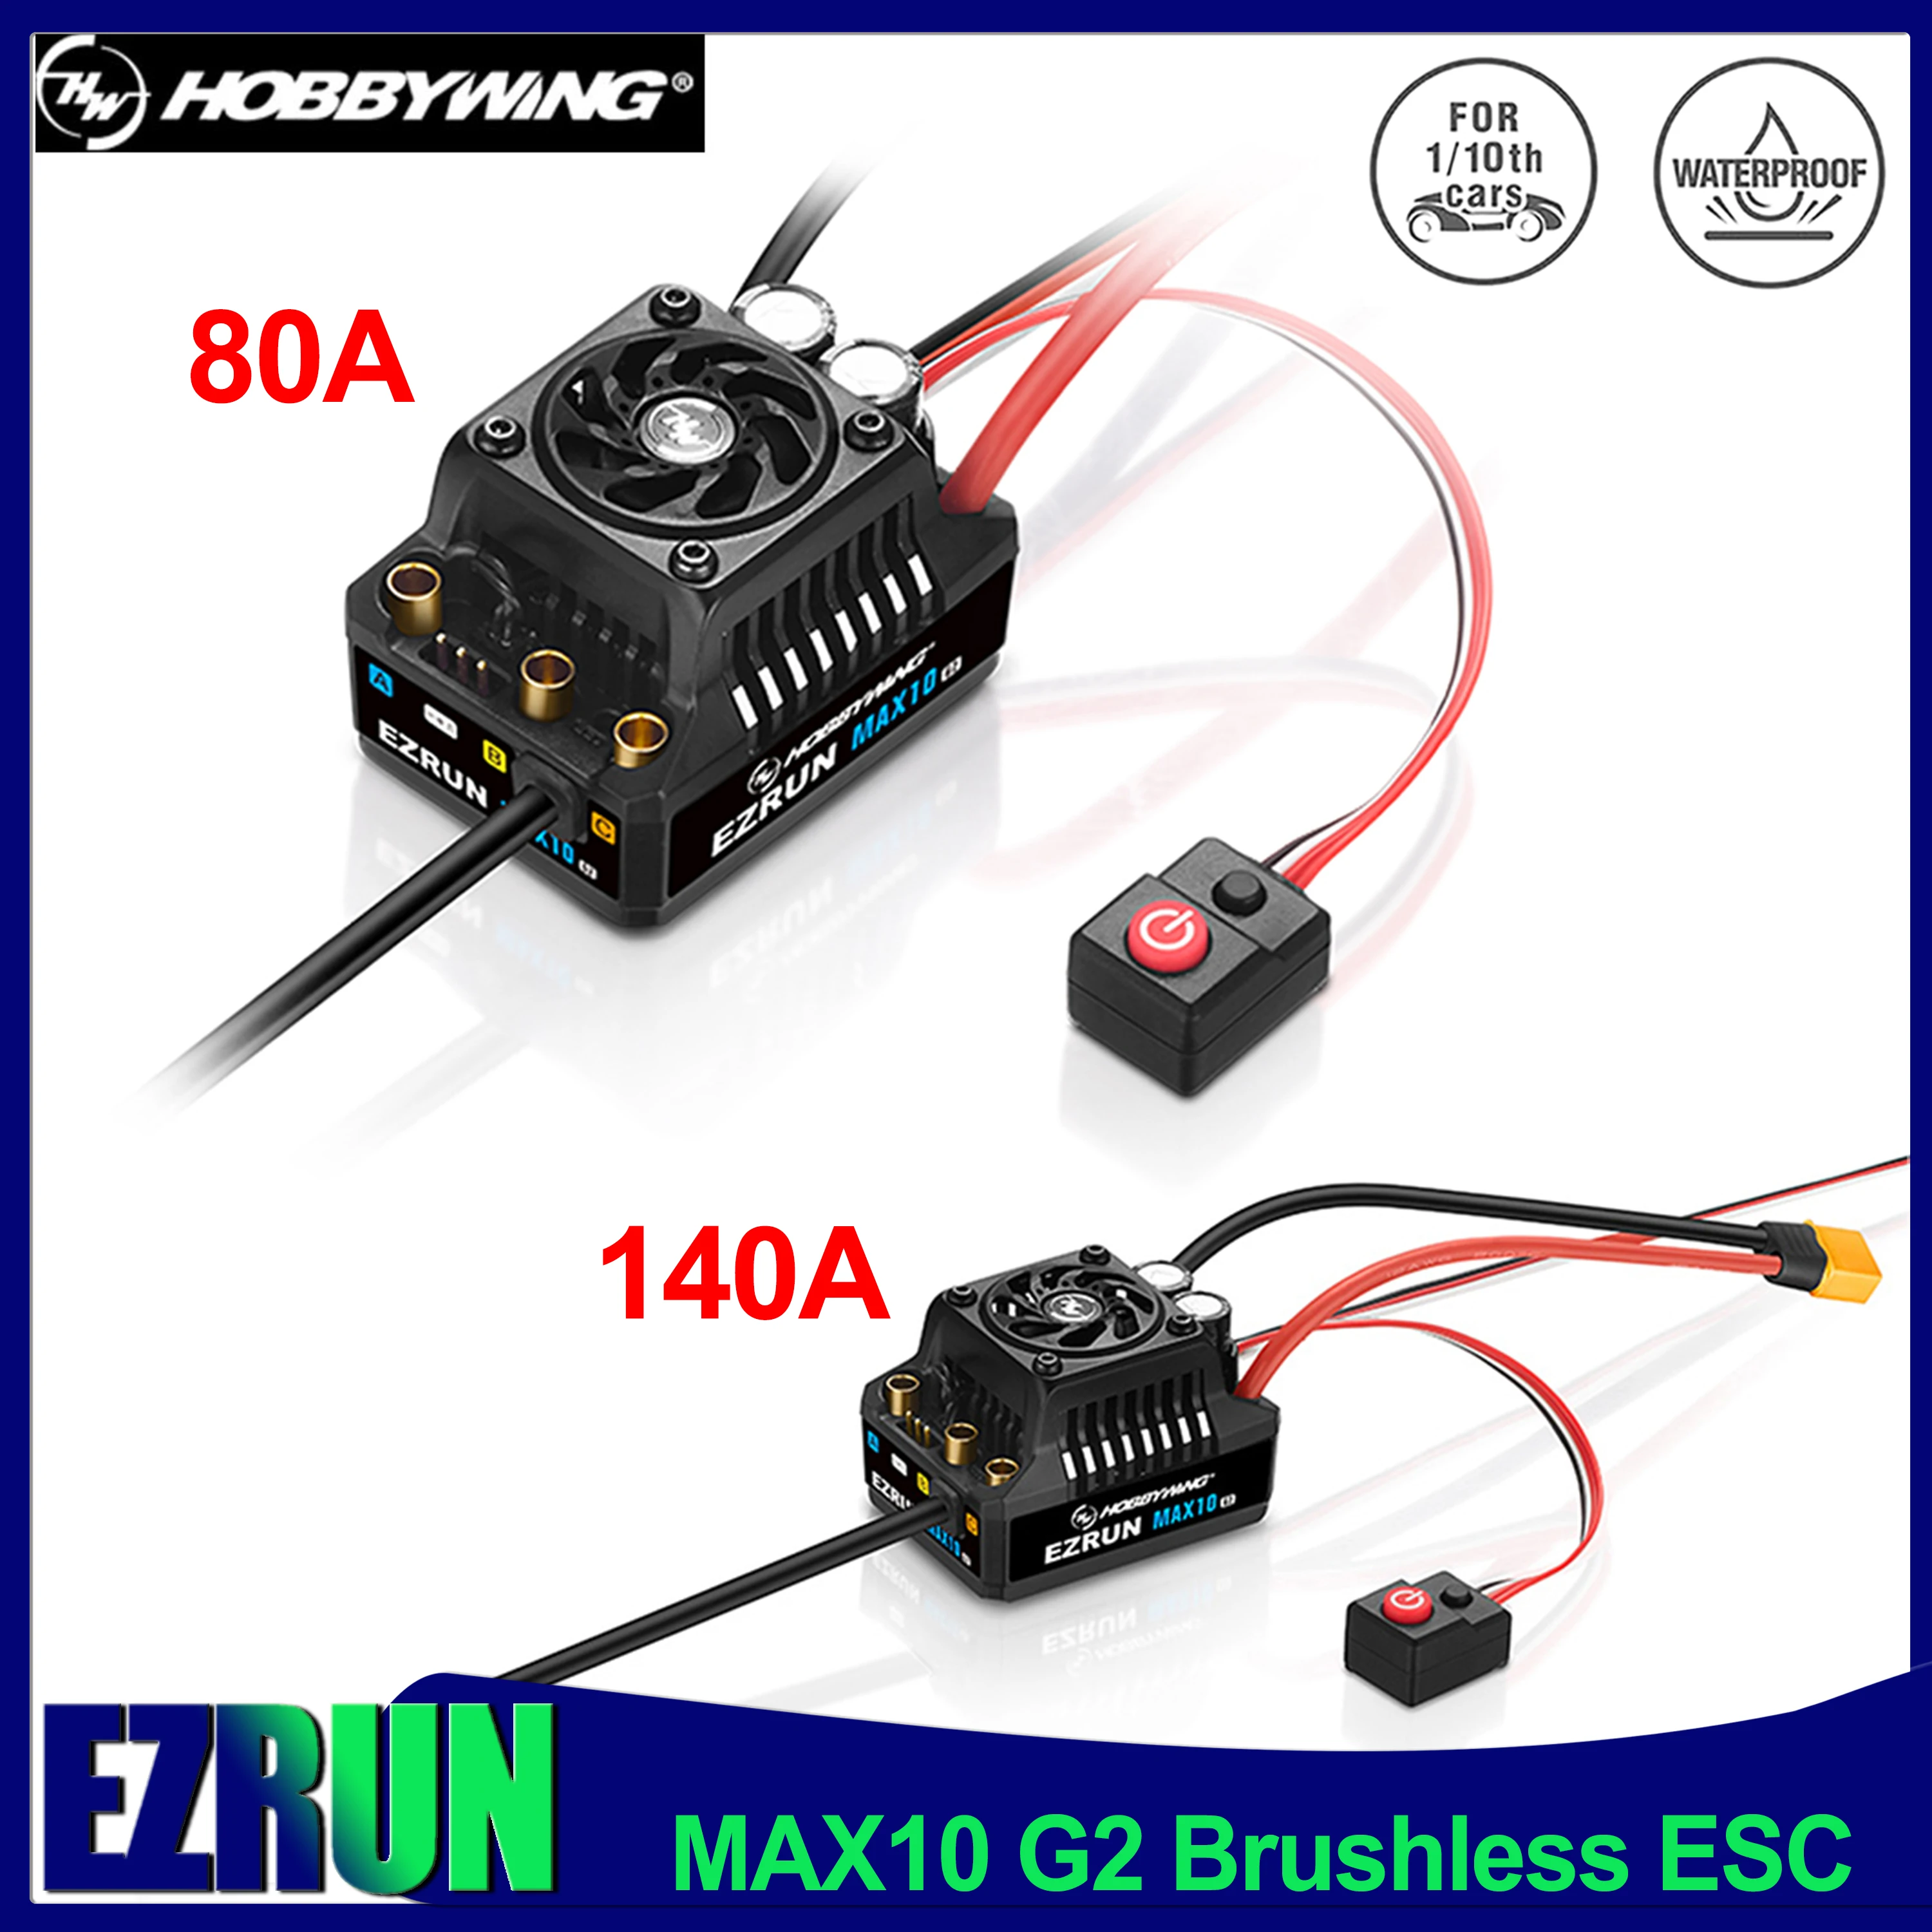 

Hobbywing MAX10 G2 80A 140A Sensored Brushless Waterproof ESC Speed Controller for 1/10 Scale RC Car Monster Trucks Crawler